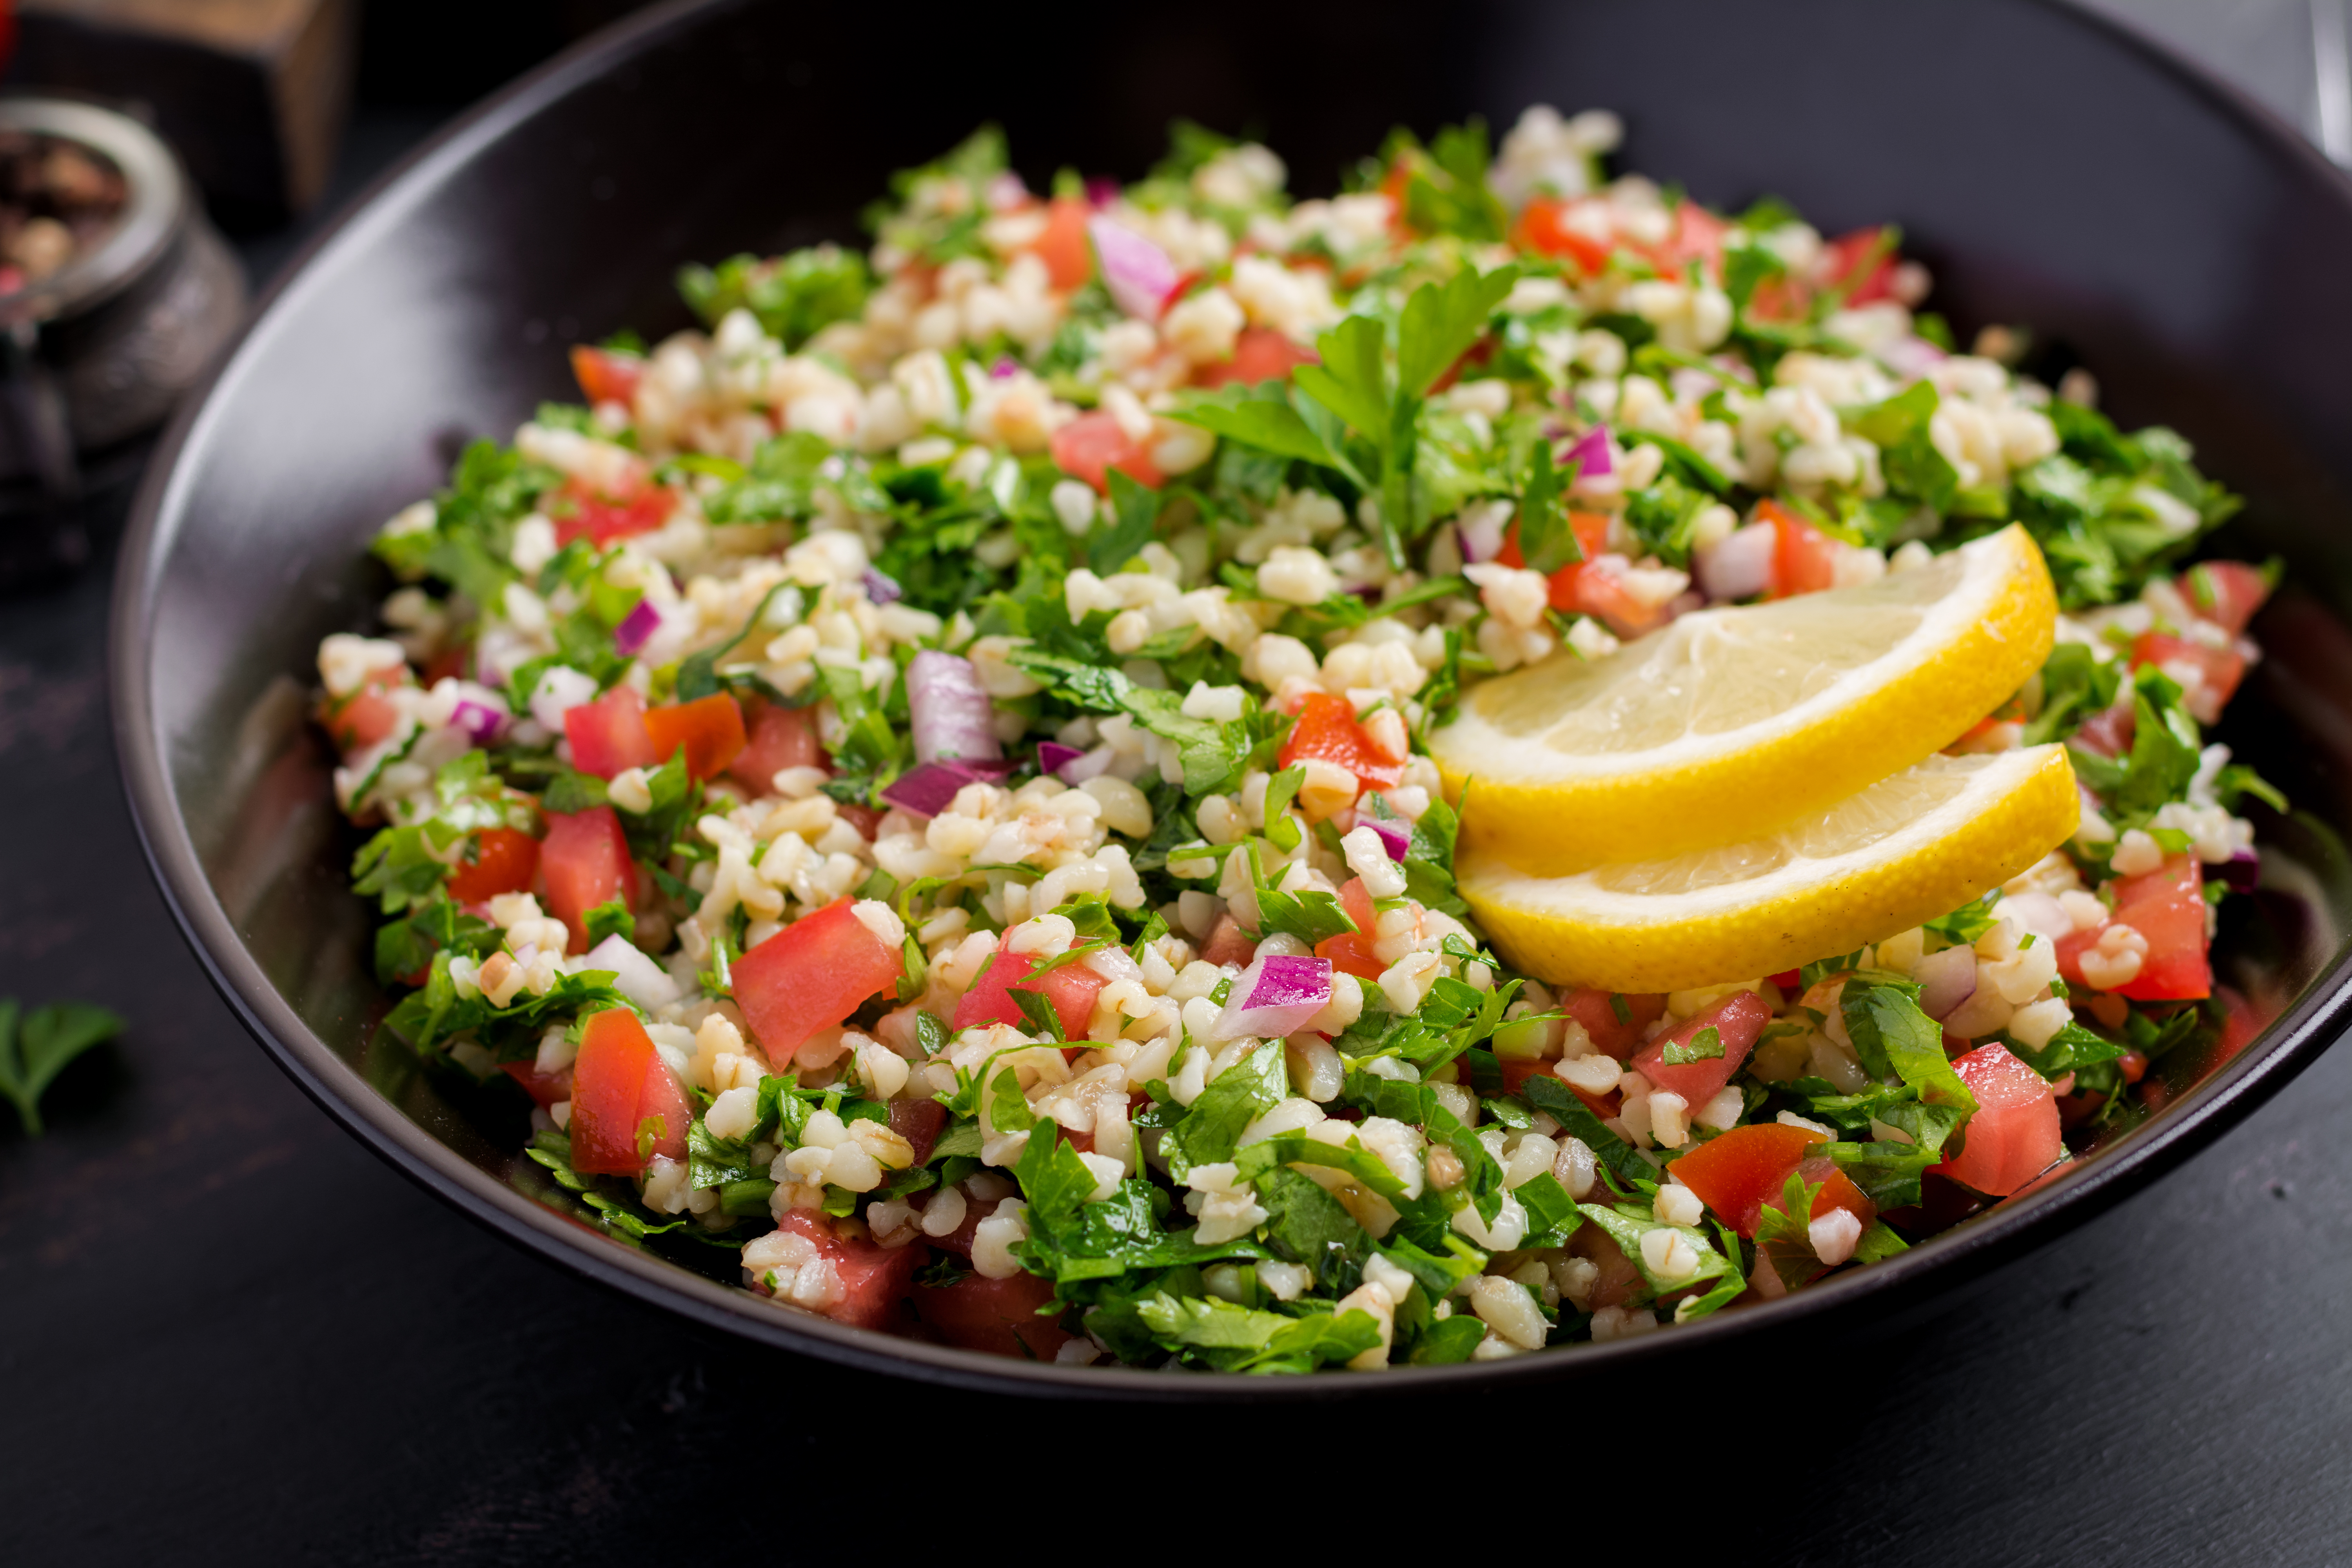 A colorful bowl of tabbouleh with lemon slices